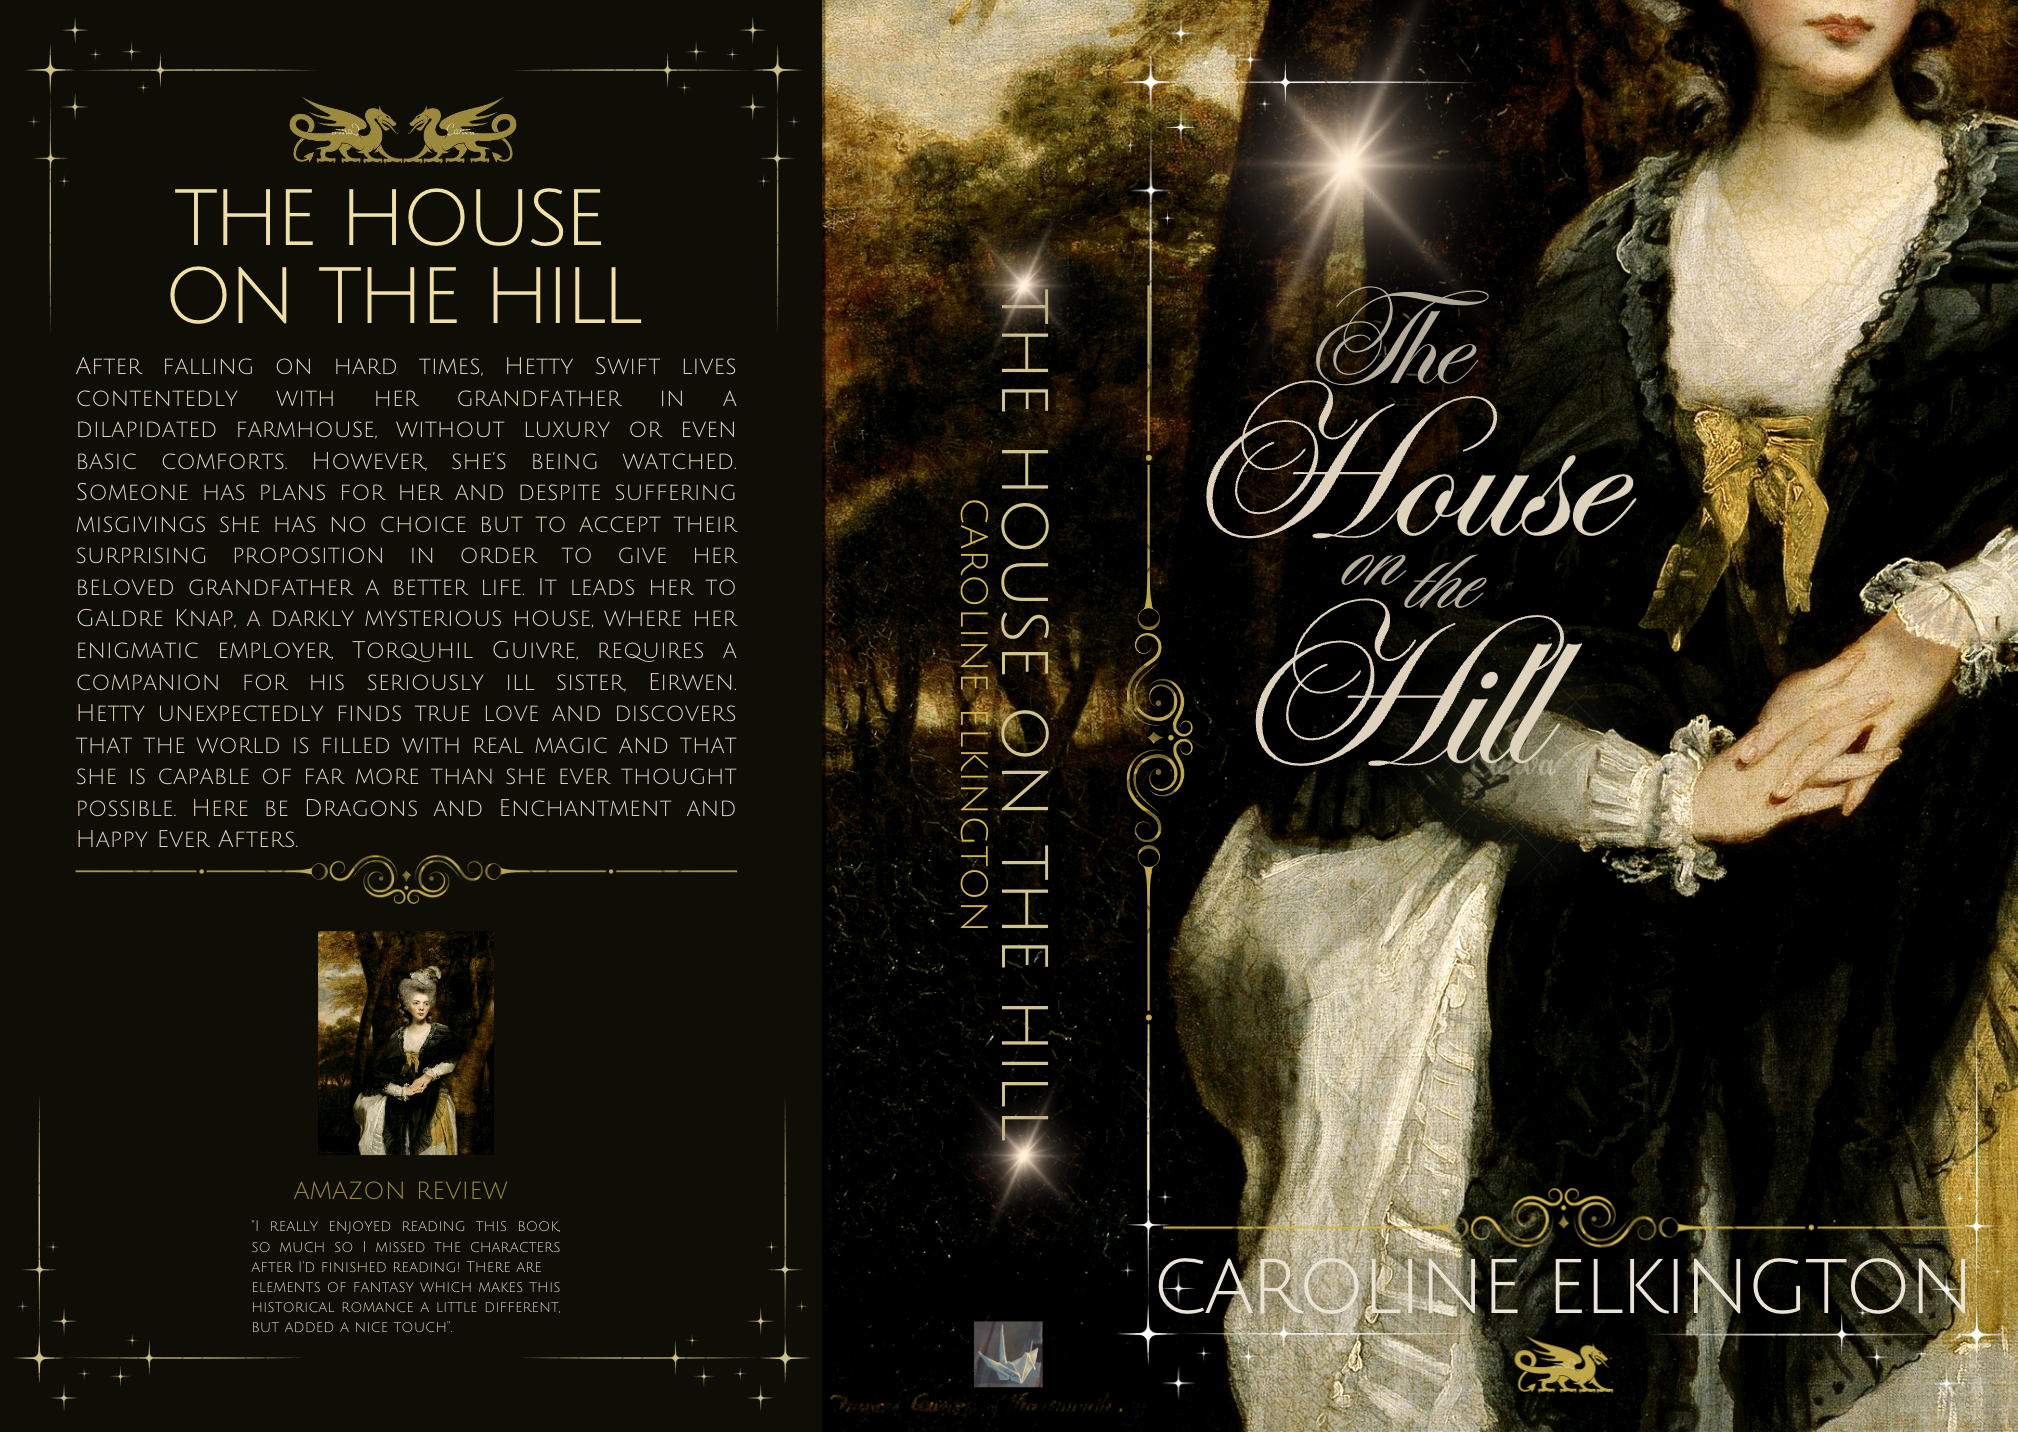 THE HOUSE ON THE HILL